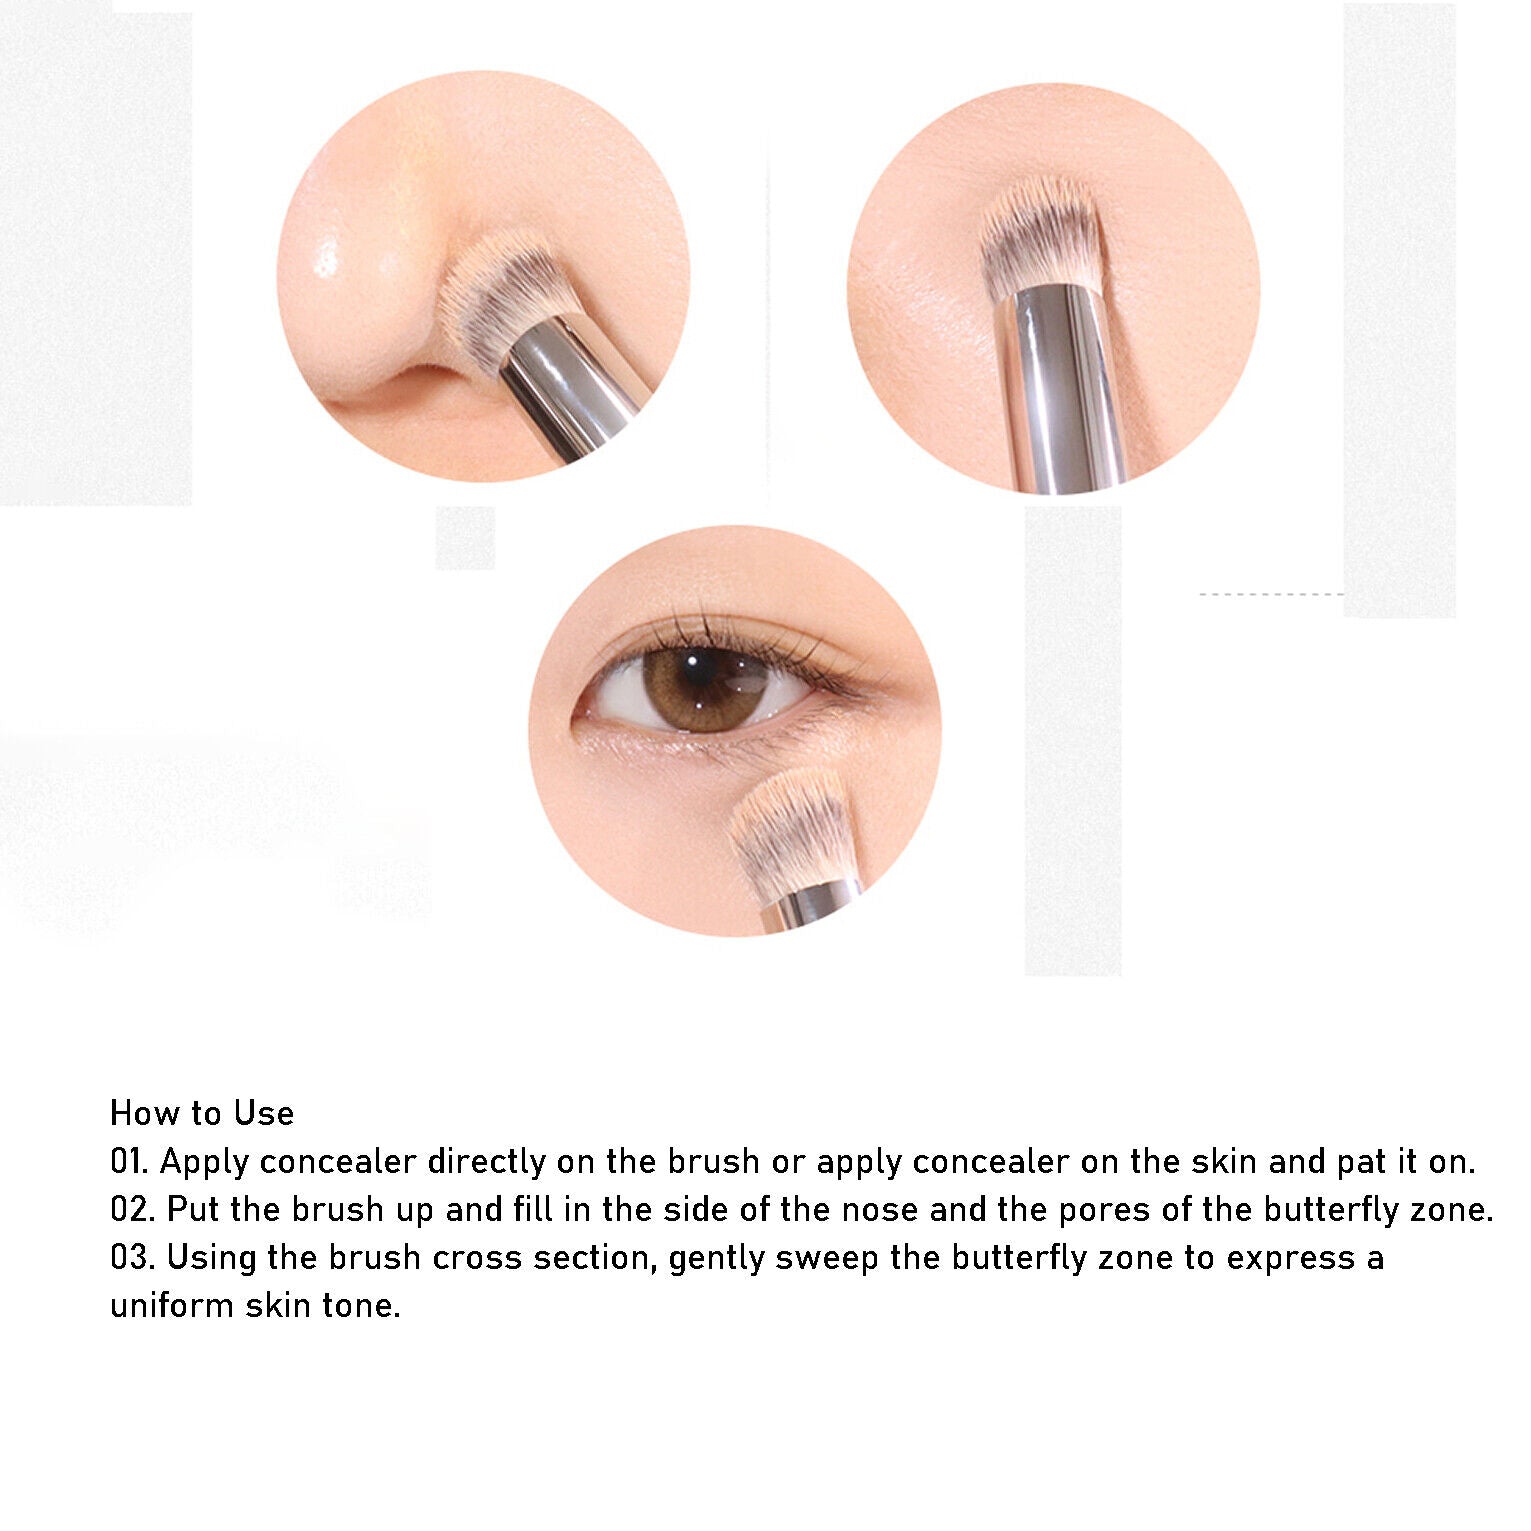 Designed to provide precise and even application of concealer.